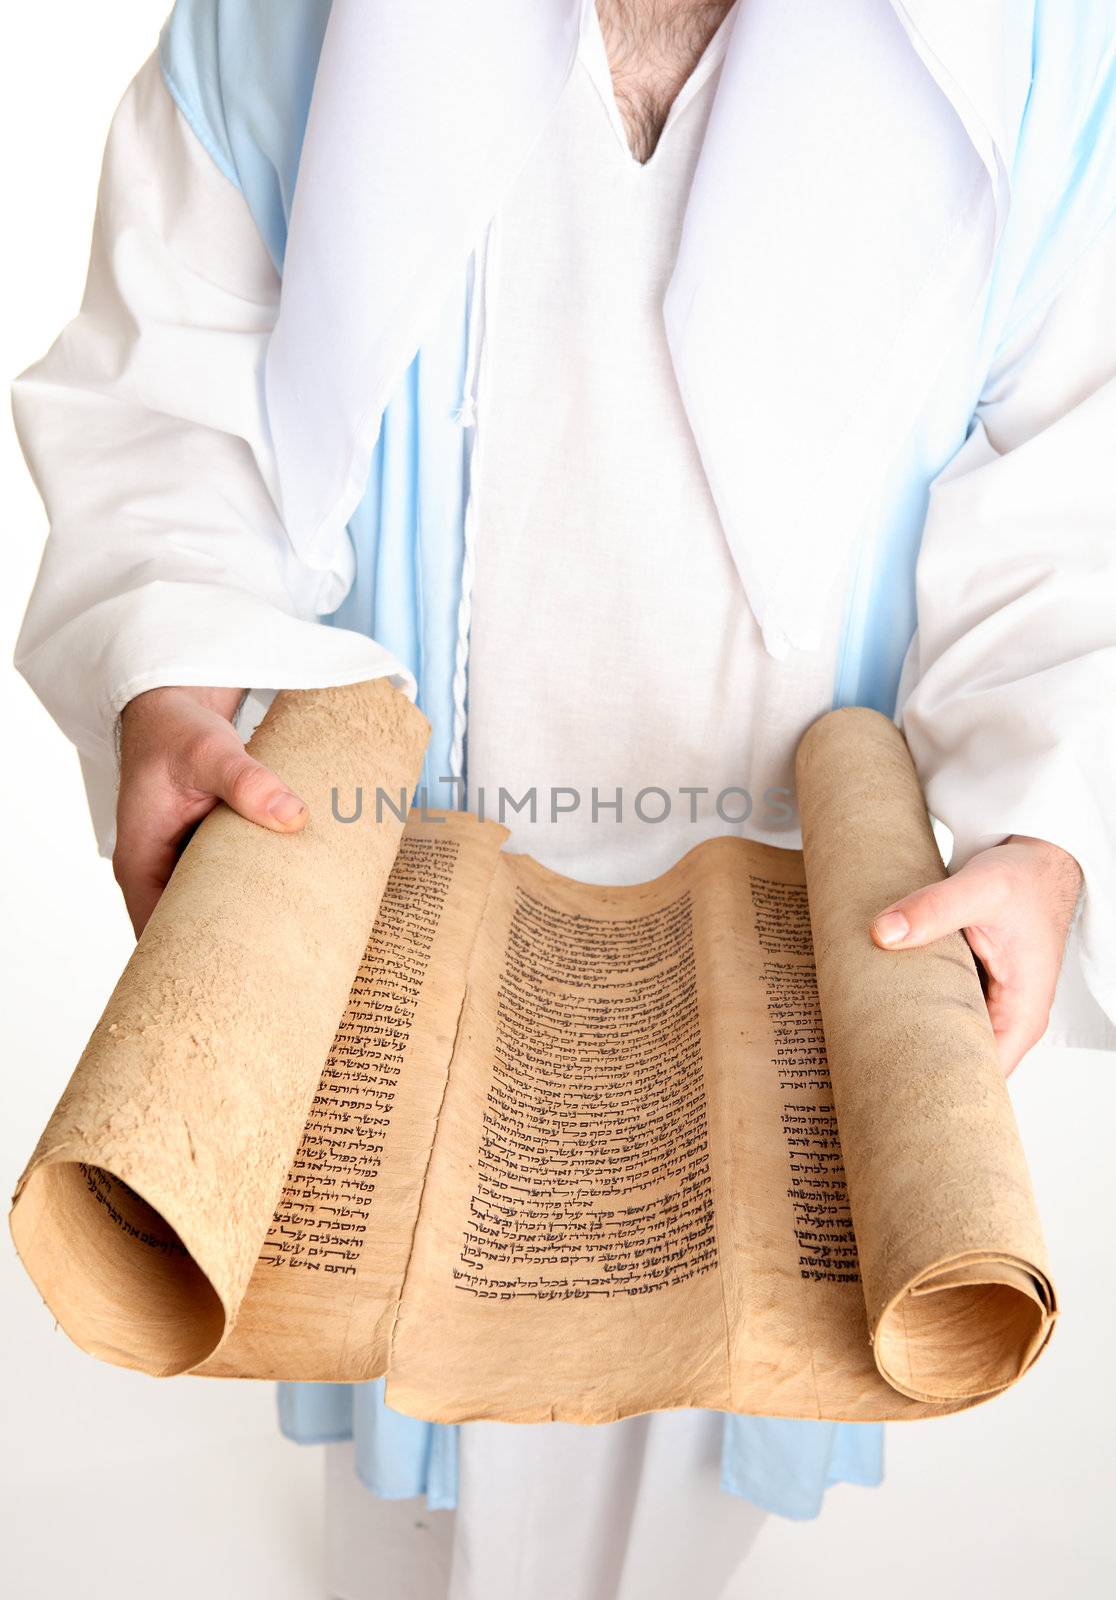 Focus to scroll.The Torah for reading in public must be written on the skin (parchment) of a clean animal, beast or fowl (comp. Lev. xi. 2 et seq.). The parchment must be prepared specially for use as a scroll, with gallnut and lime and other chemicals that help to render it durable (Meg. 19a). In olden times the rough hide was scraped on both sides, parchment made known as gewil. Every page was squared, and the lines were ruled with a stylus. Only the best black ink was used  by means of a stick or quill; and the text was in square Hebrew characters. 

